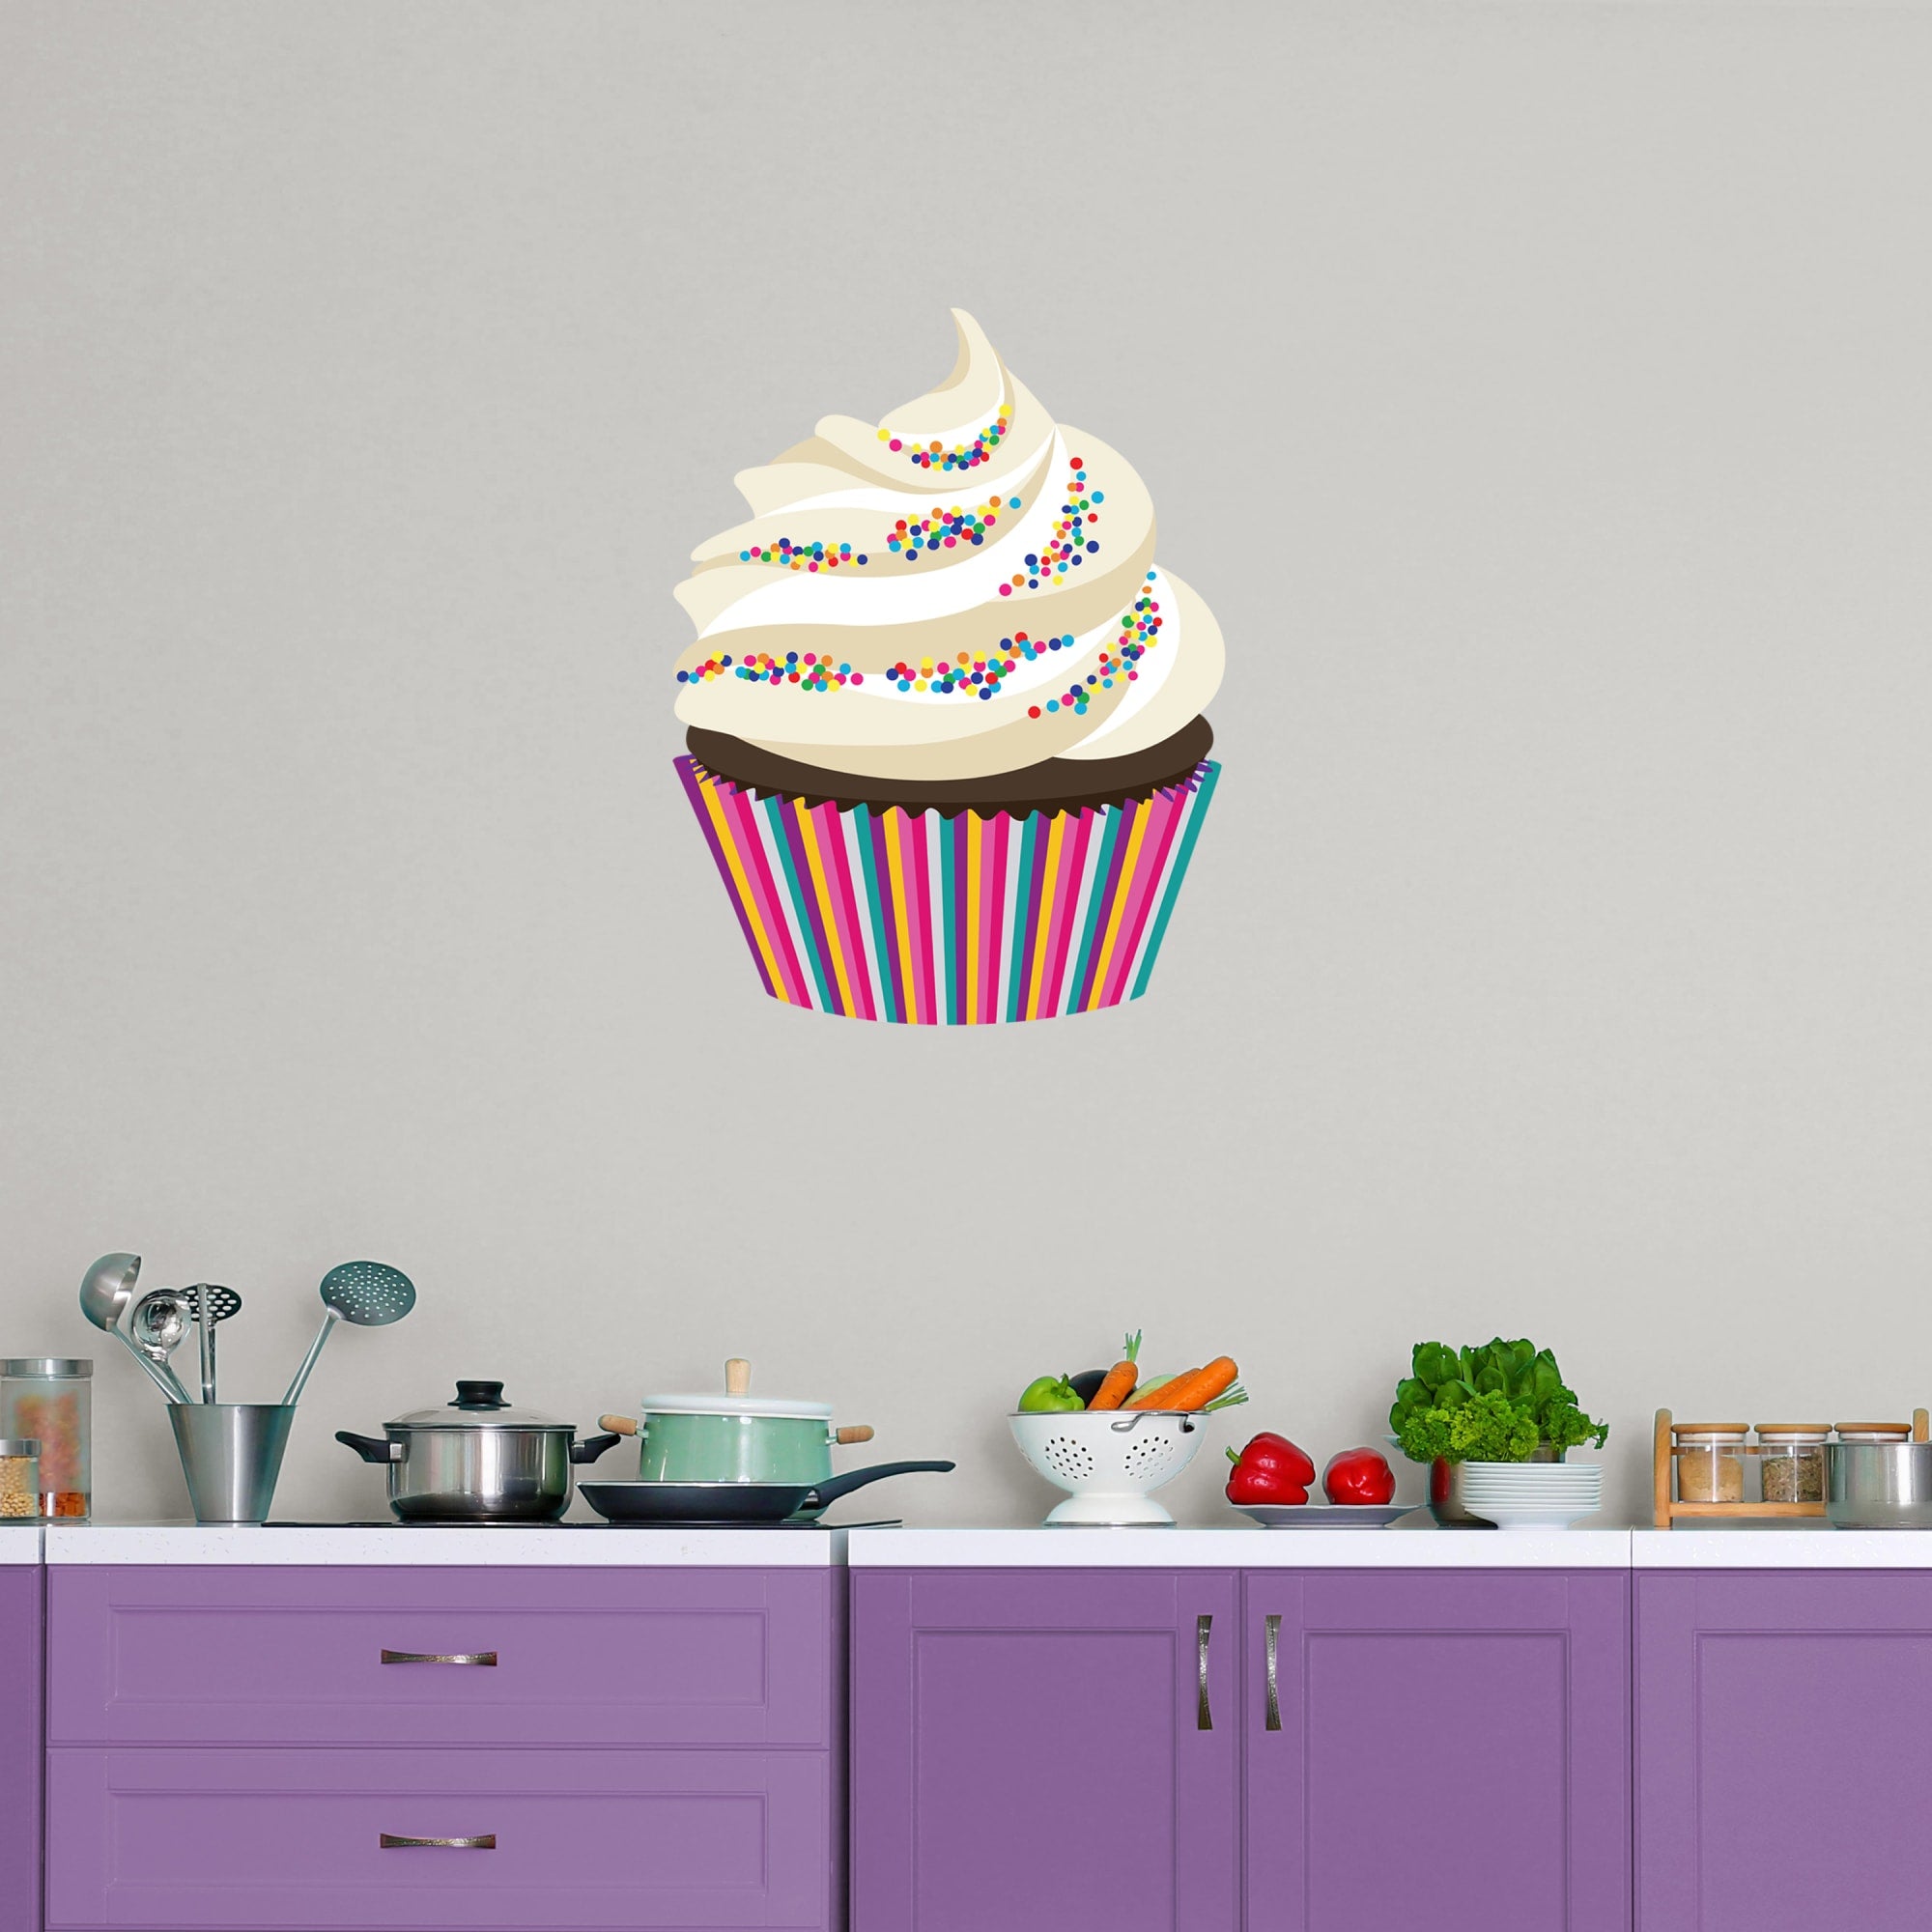 Cupcake: Illustrated - Removable Vinyl Decal XL by Fathead